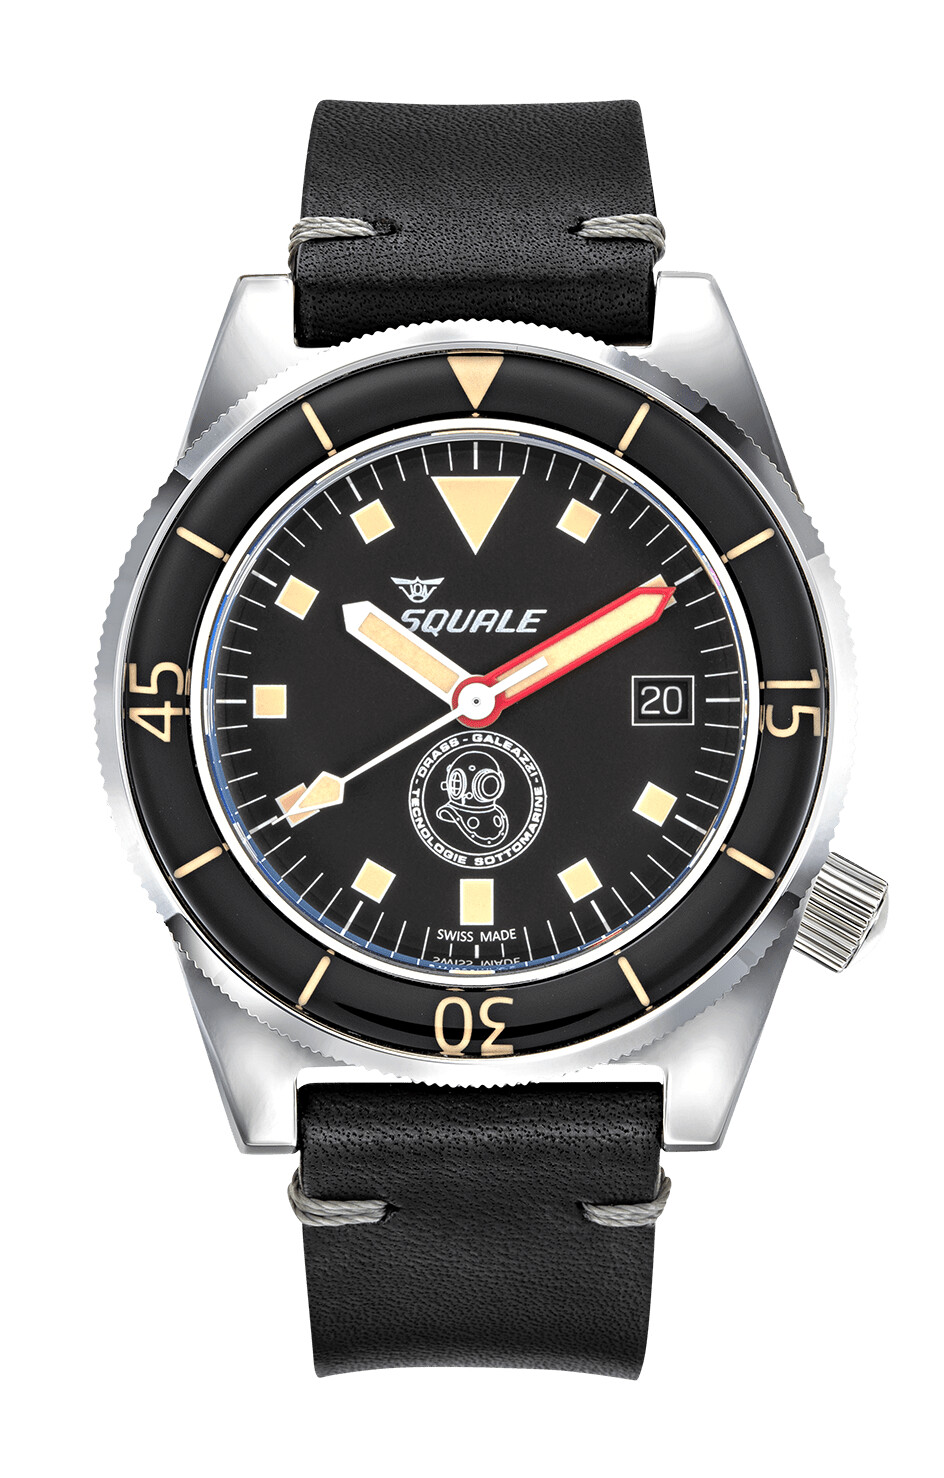 squale-galeazzi-front